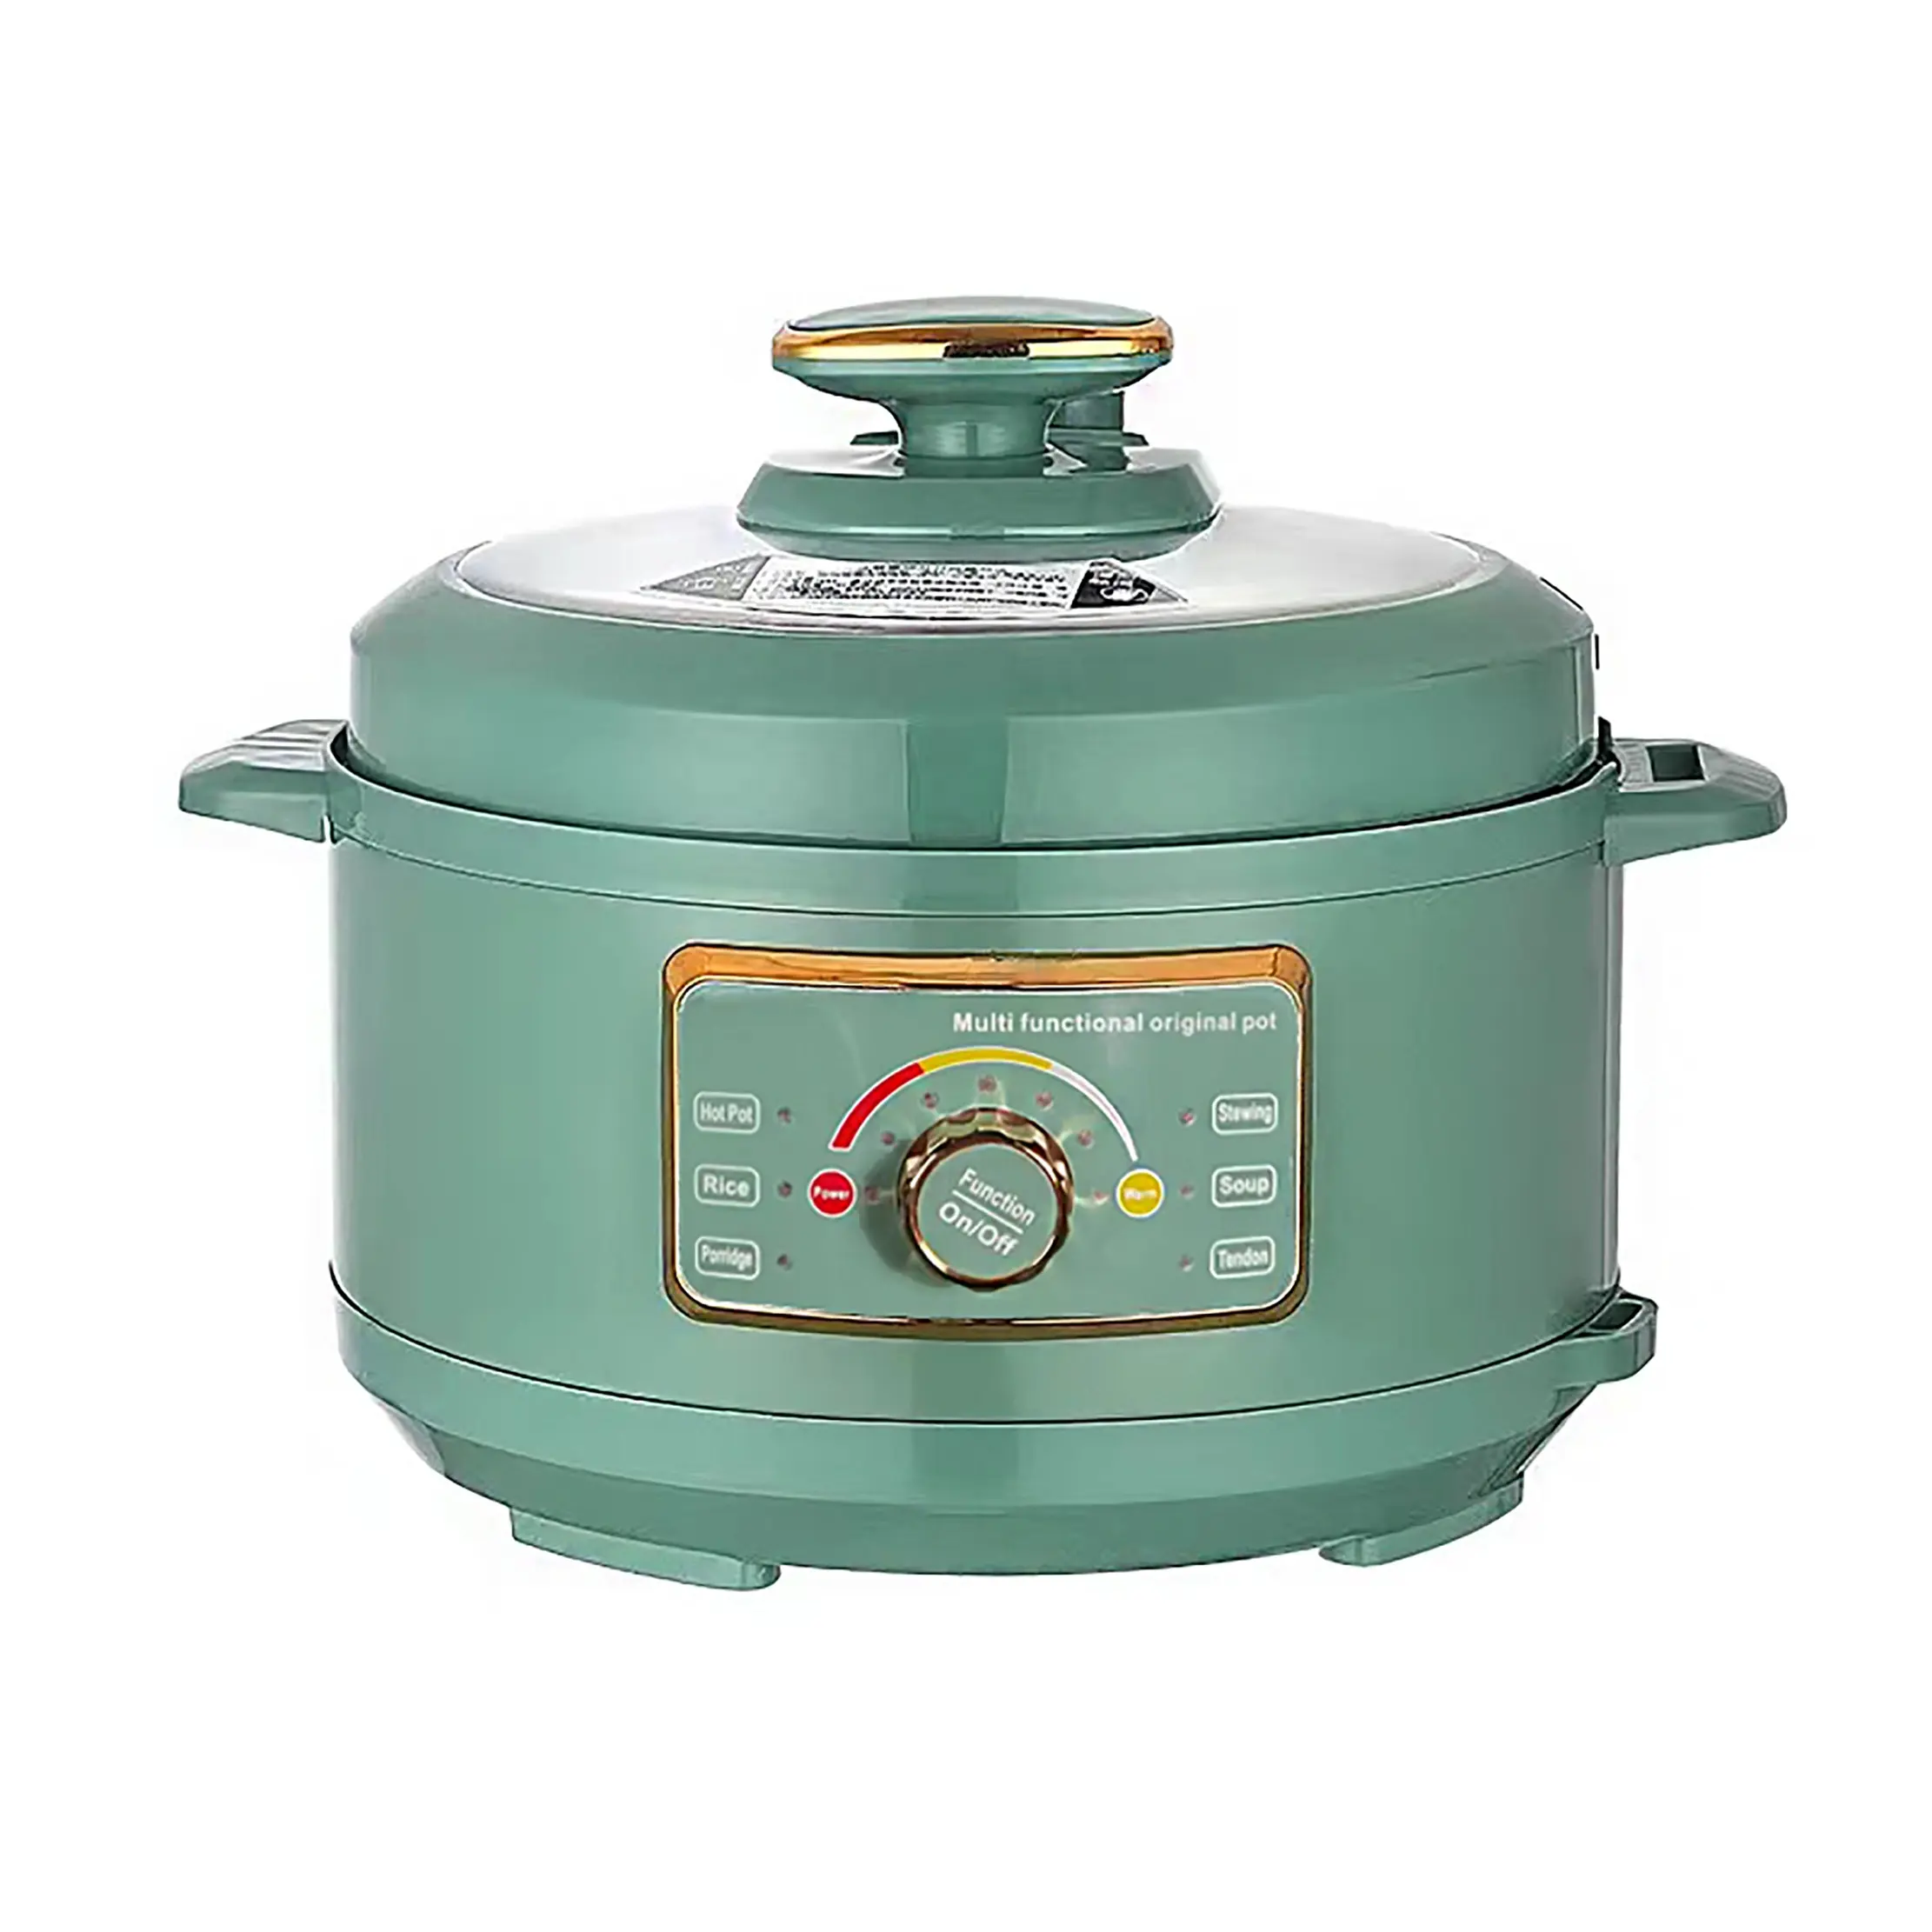 Multipurpose new electric pressure cooker 3.5L double-liner household multifunctional electric cooker pressure cooker